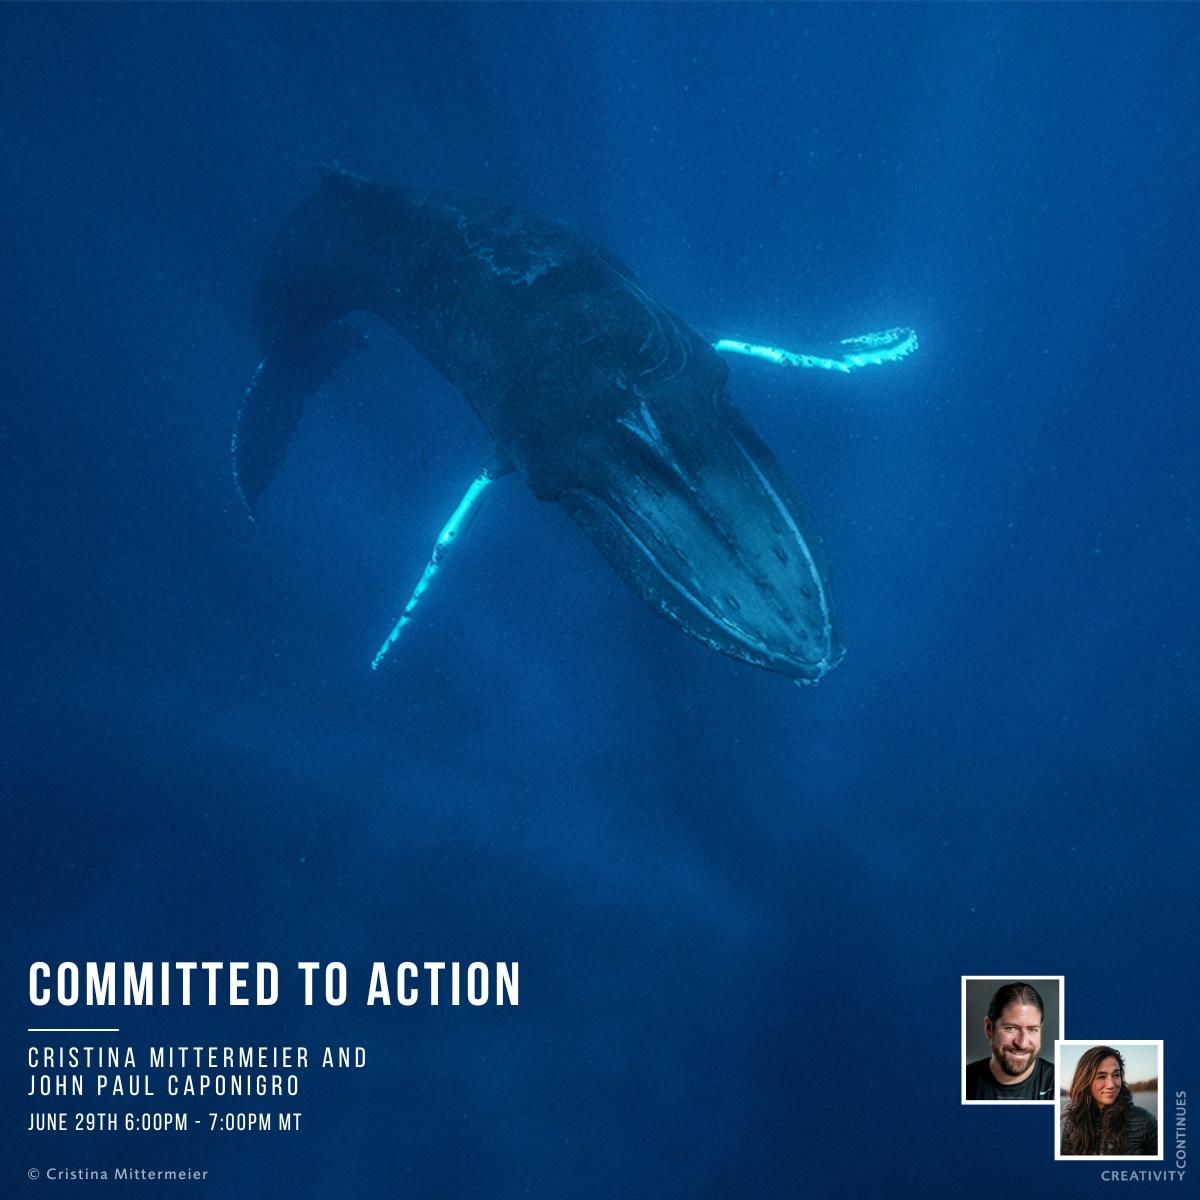 Committed to Action: Cristina Mittermeier and John Paul Caponigro